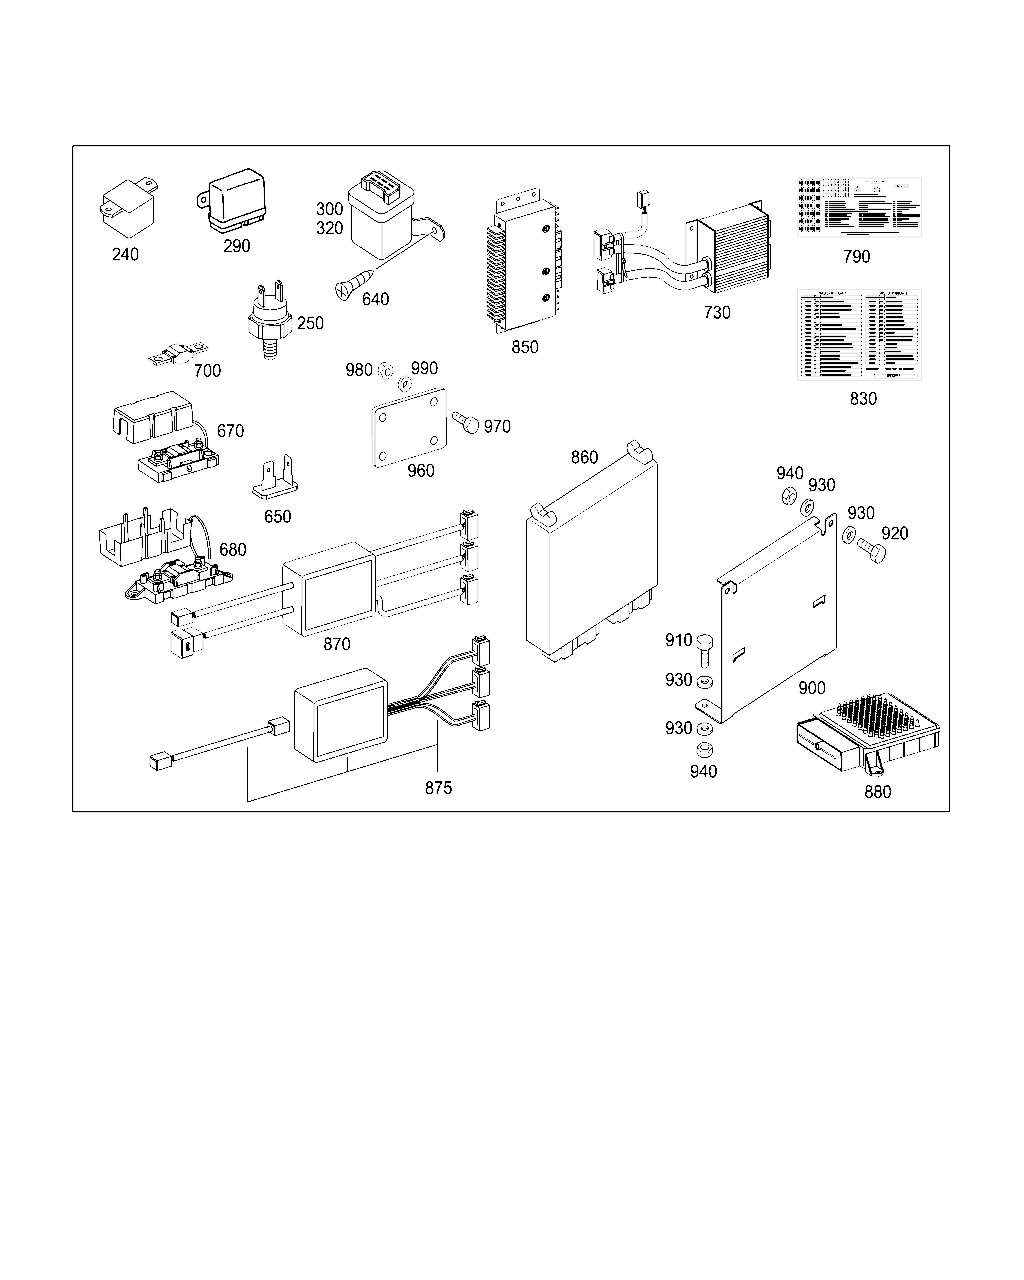 APPARATUS PLATE AND CONTROL UNITS [Автобус] MERCEDES [ЕВРОПА] [ШАССИ]OMC 1623 51 1626 51